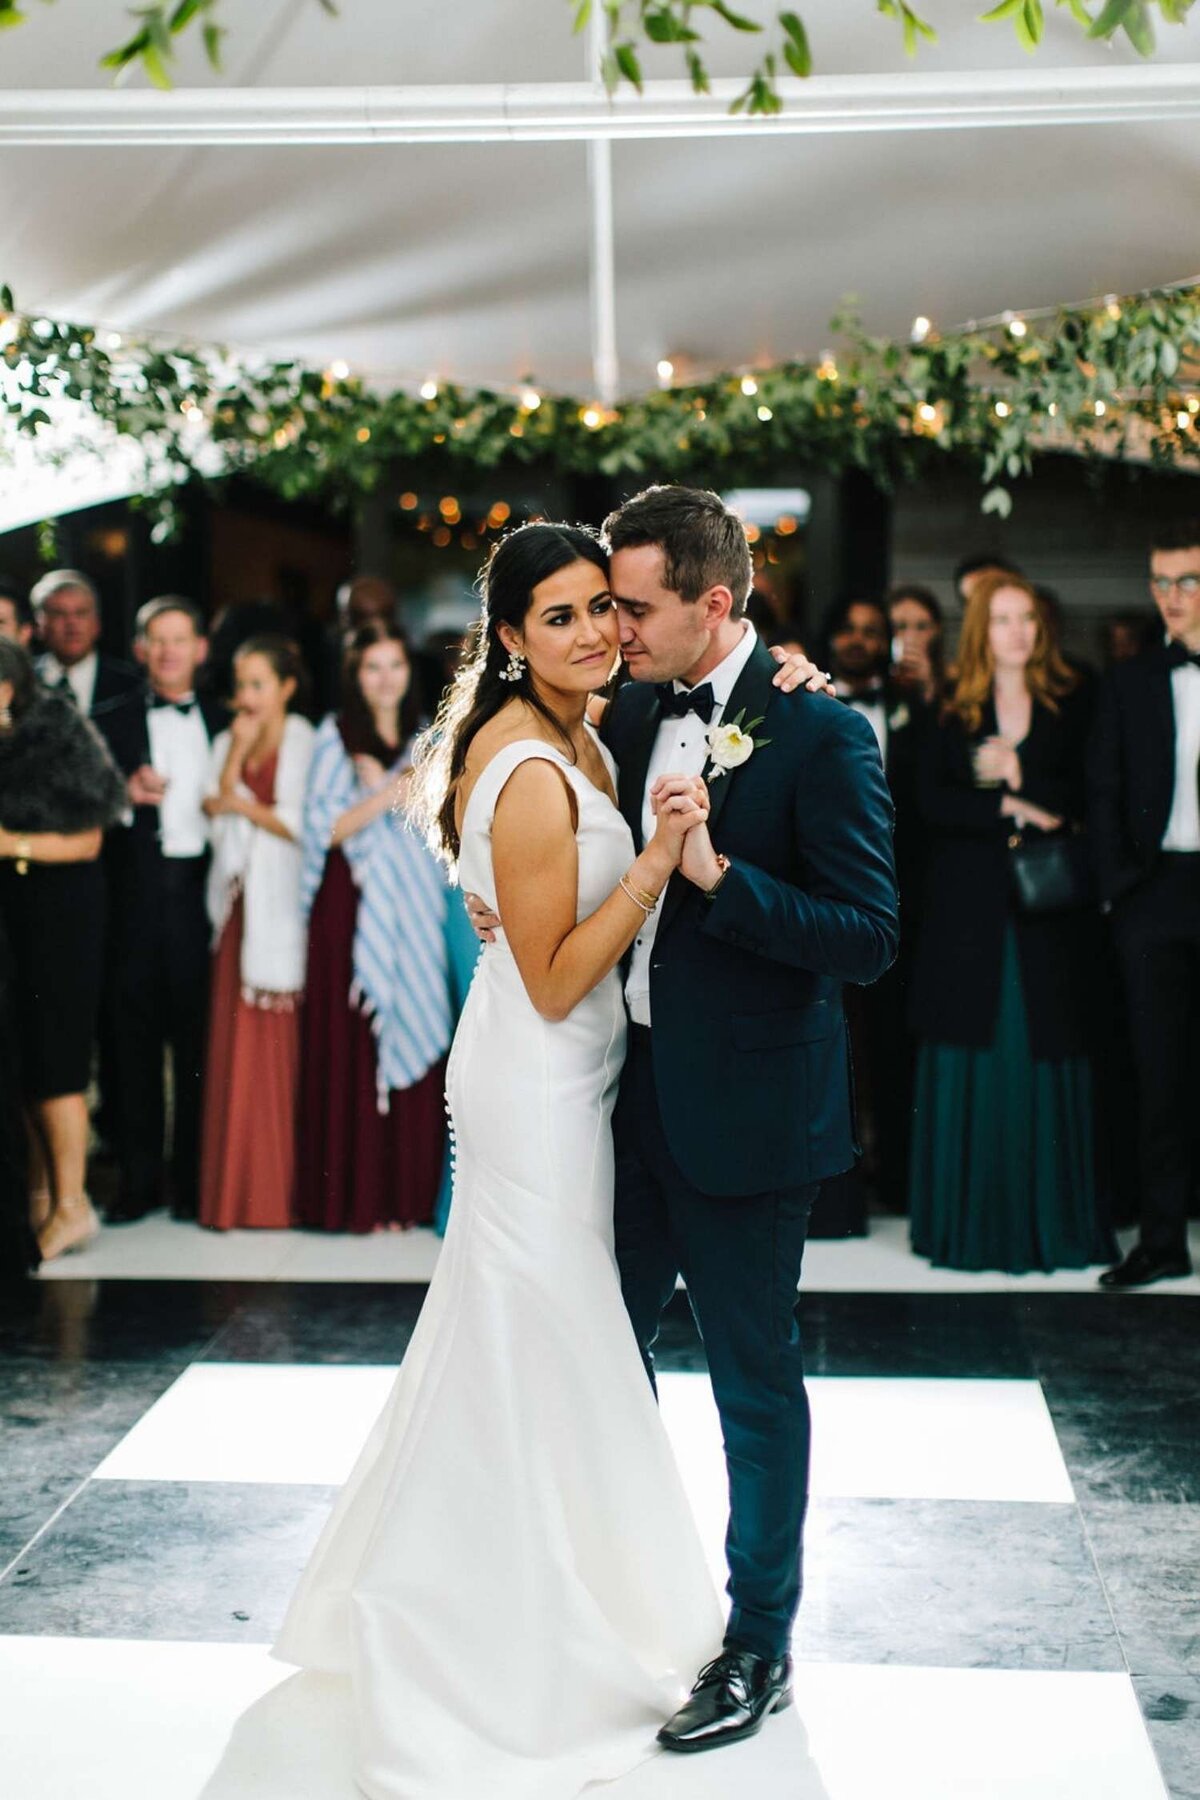 Classic and Elegant Black and White Wedding First Dance under the Tent at a Luxury Michigan Lakefront Golf Club Wedding.